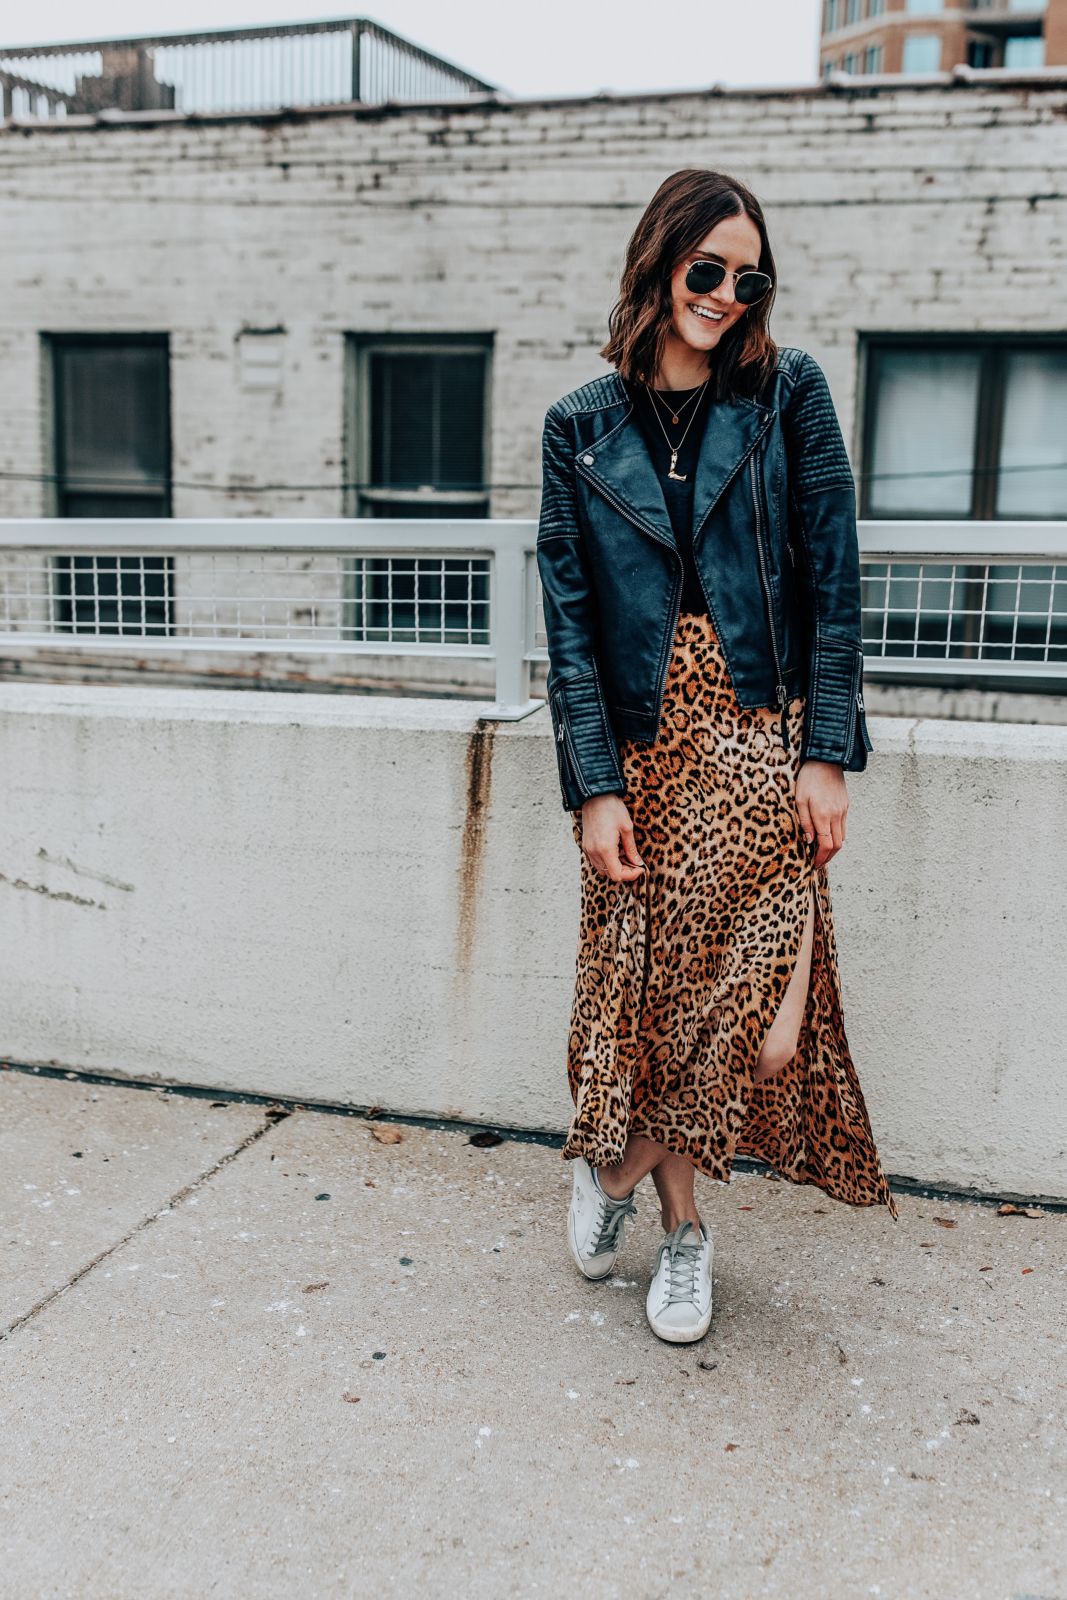 How To Wear One Leopard Print Skirt 3 Ways | Oh Darling Blog